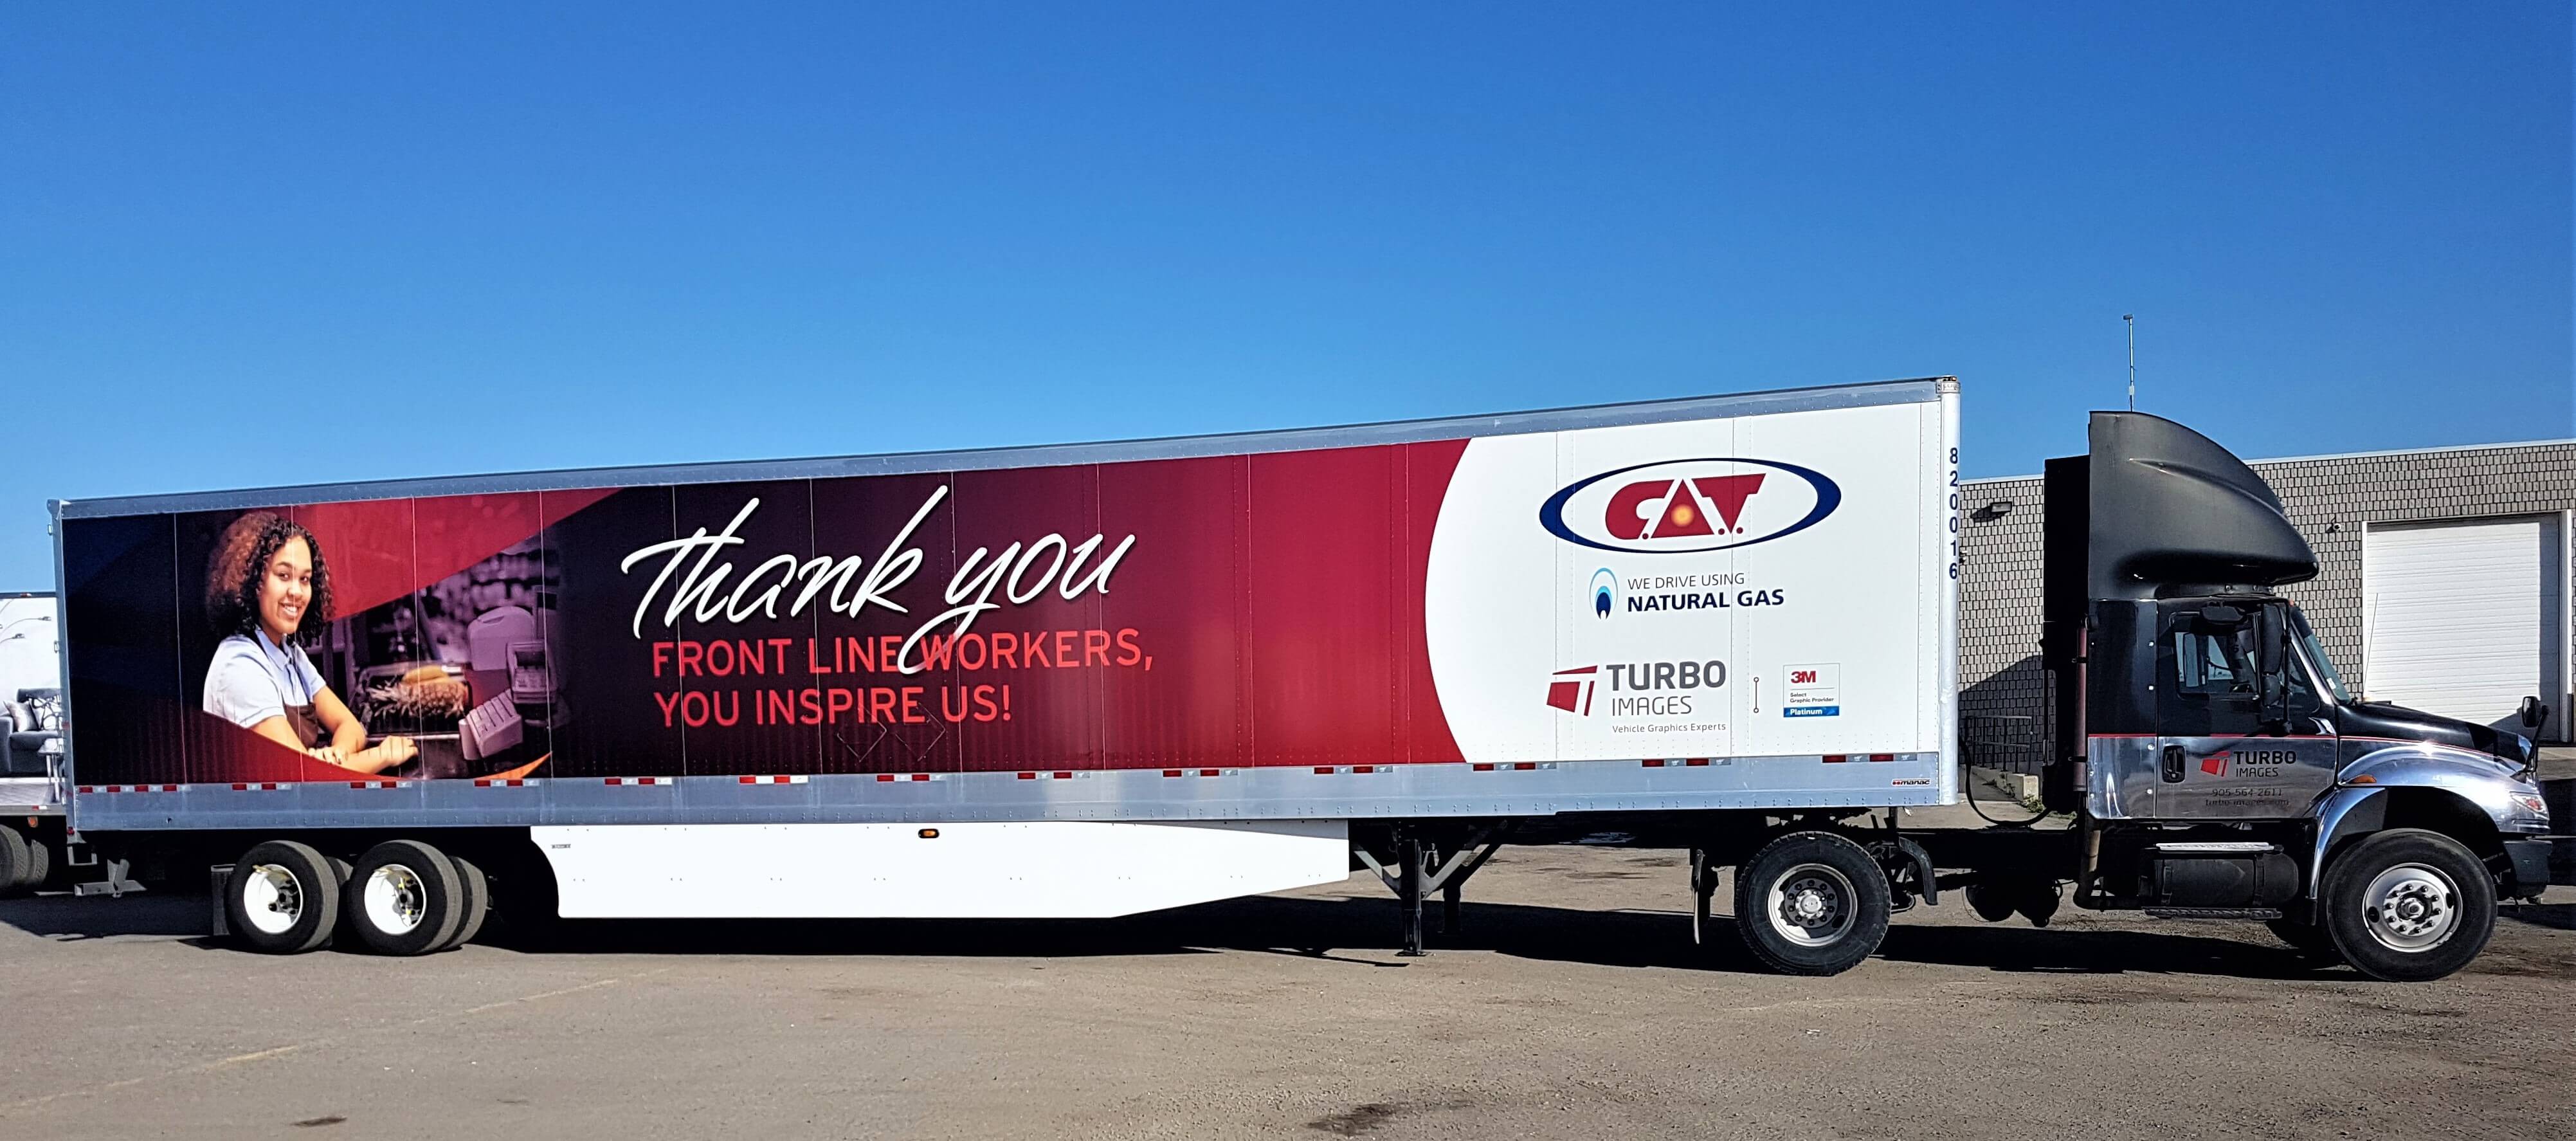 Vinyl trailer wrap thanking front line workers by Turbo Images the leader in trailer wraps and many great partners in this great trailer wrap project. For a great design and custom vinyl truck or trailer wrapping job, contact Turbo Images.